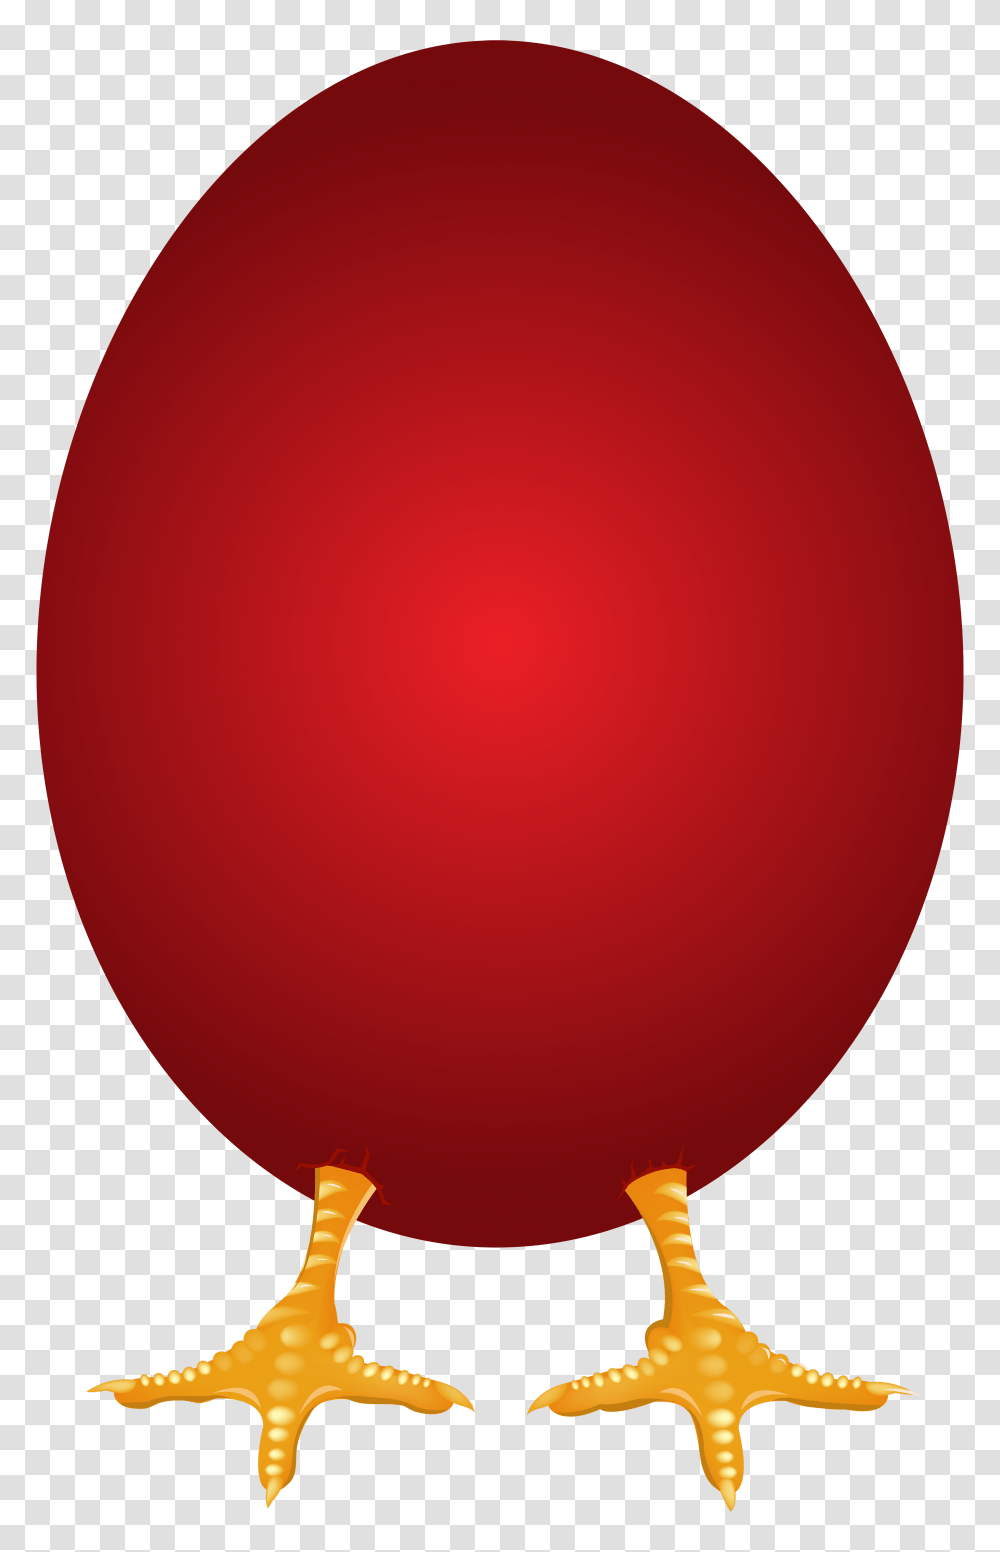 Easter Egg With Legs Clip Art, Balloon, Glass, Sweets, Food Transparent Png